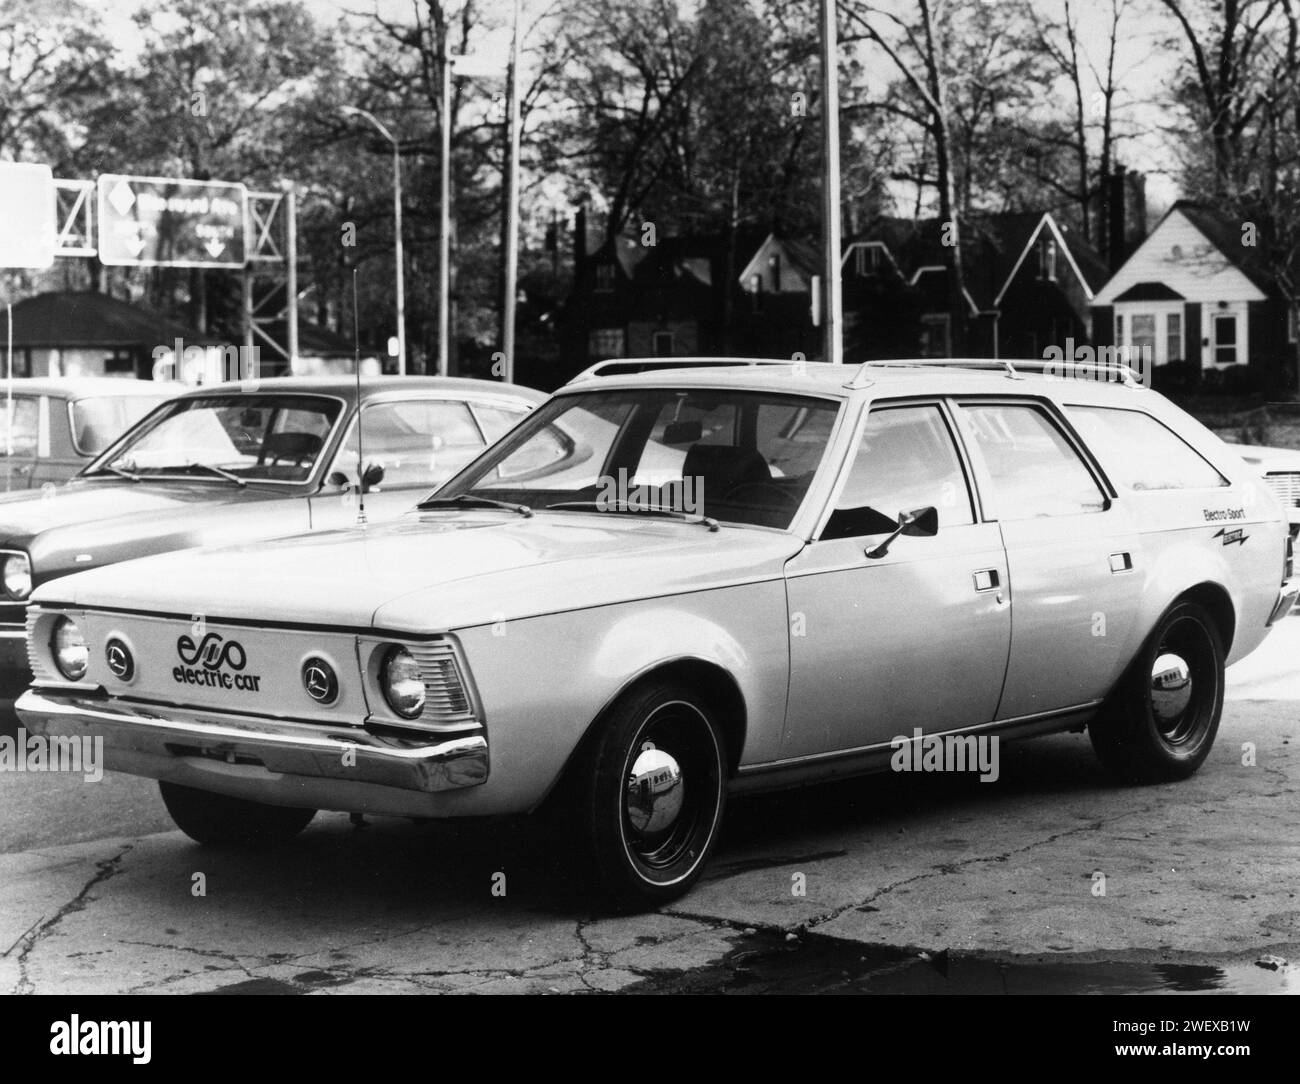 The Electrosport, an experimental 5-passenger electric station wagon produced by Electric Fuel Propulsion and built from an AMC Hornet, was the first electrically-powered auto to be mass-produced in the United States since the early 1900's, Ferndale, MI, 1972. Photo by Electric Fuel Propulsion Stock Photo